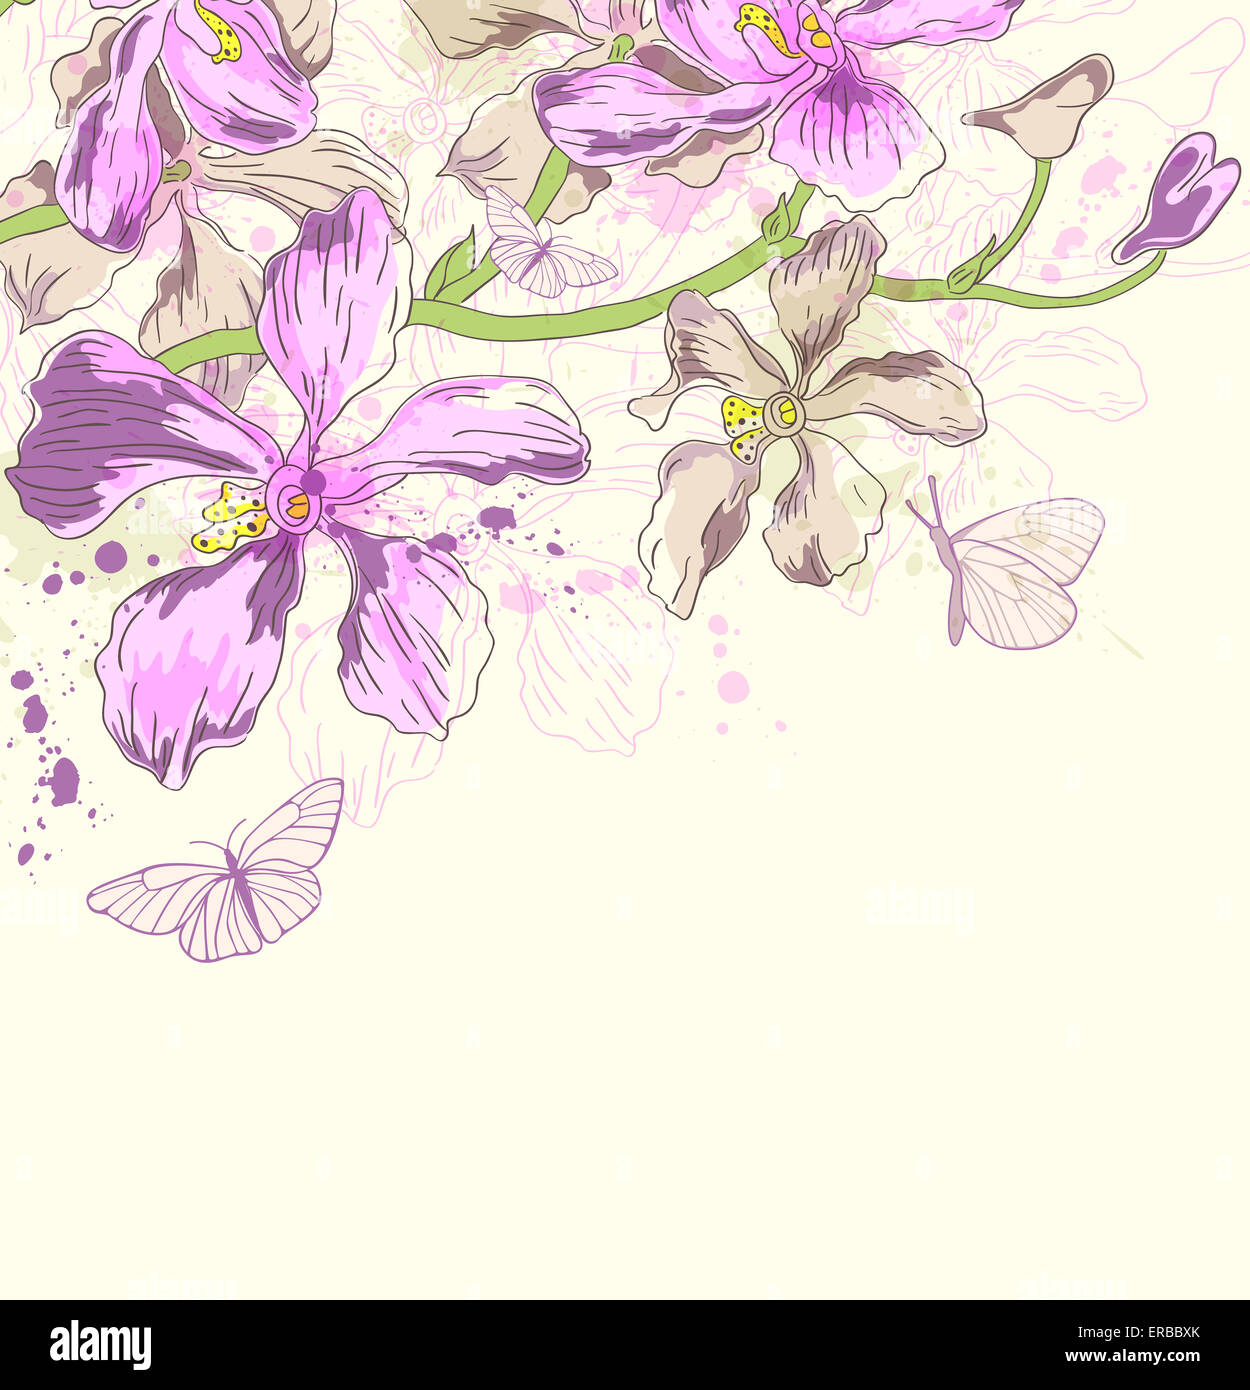 Decorative background with orchids and butterflies Stock Photo